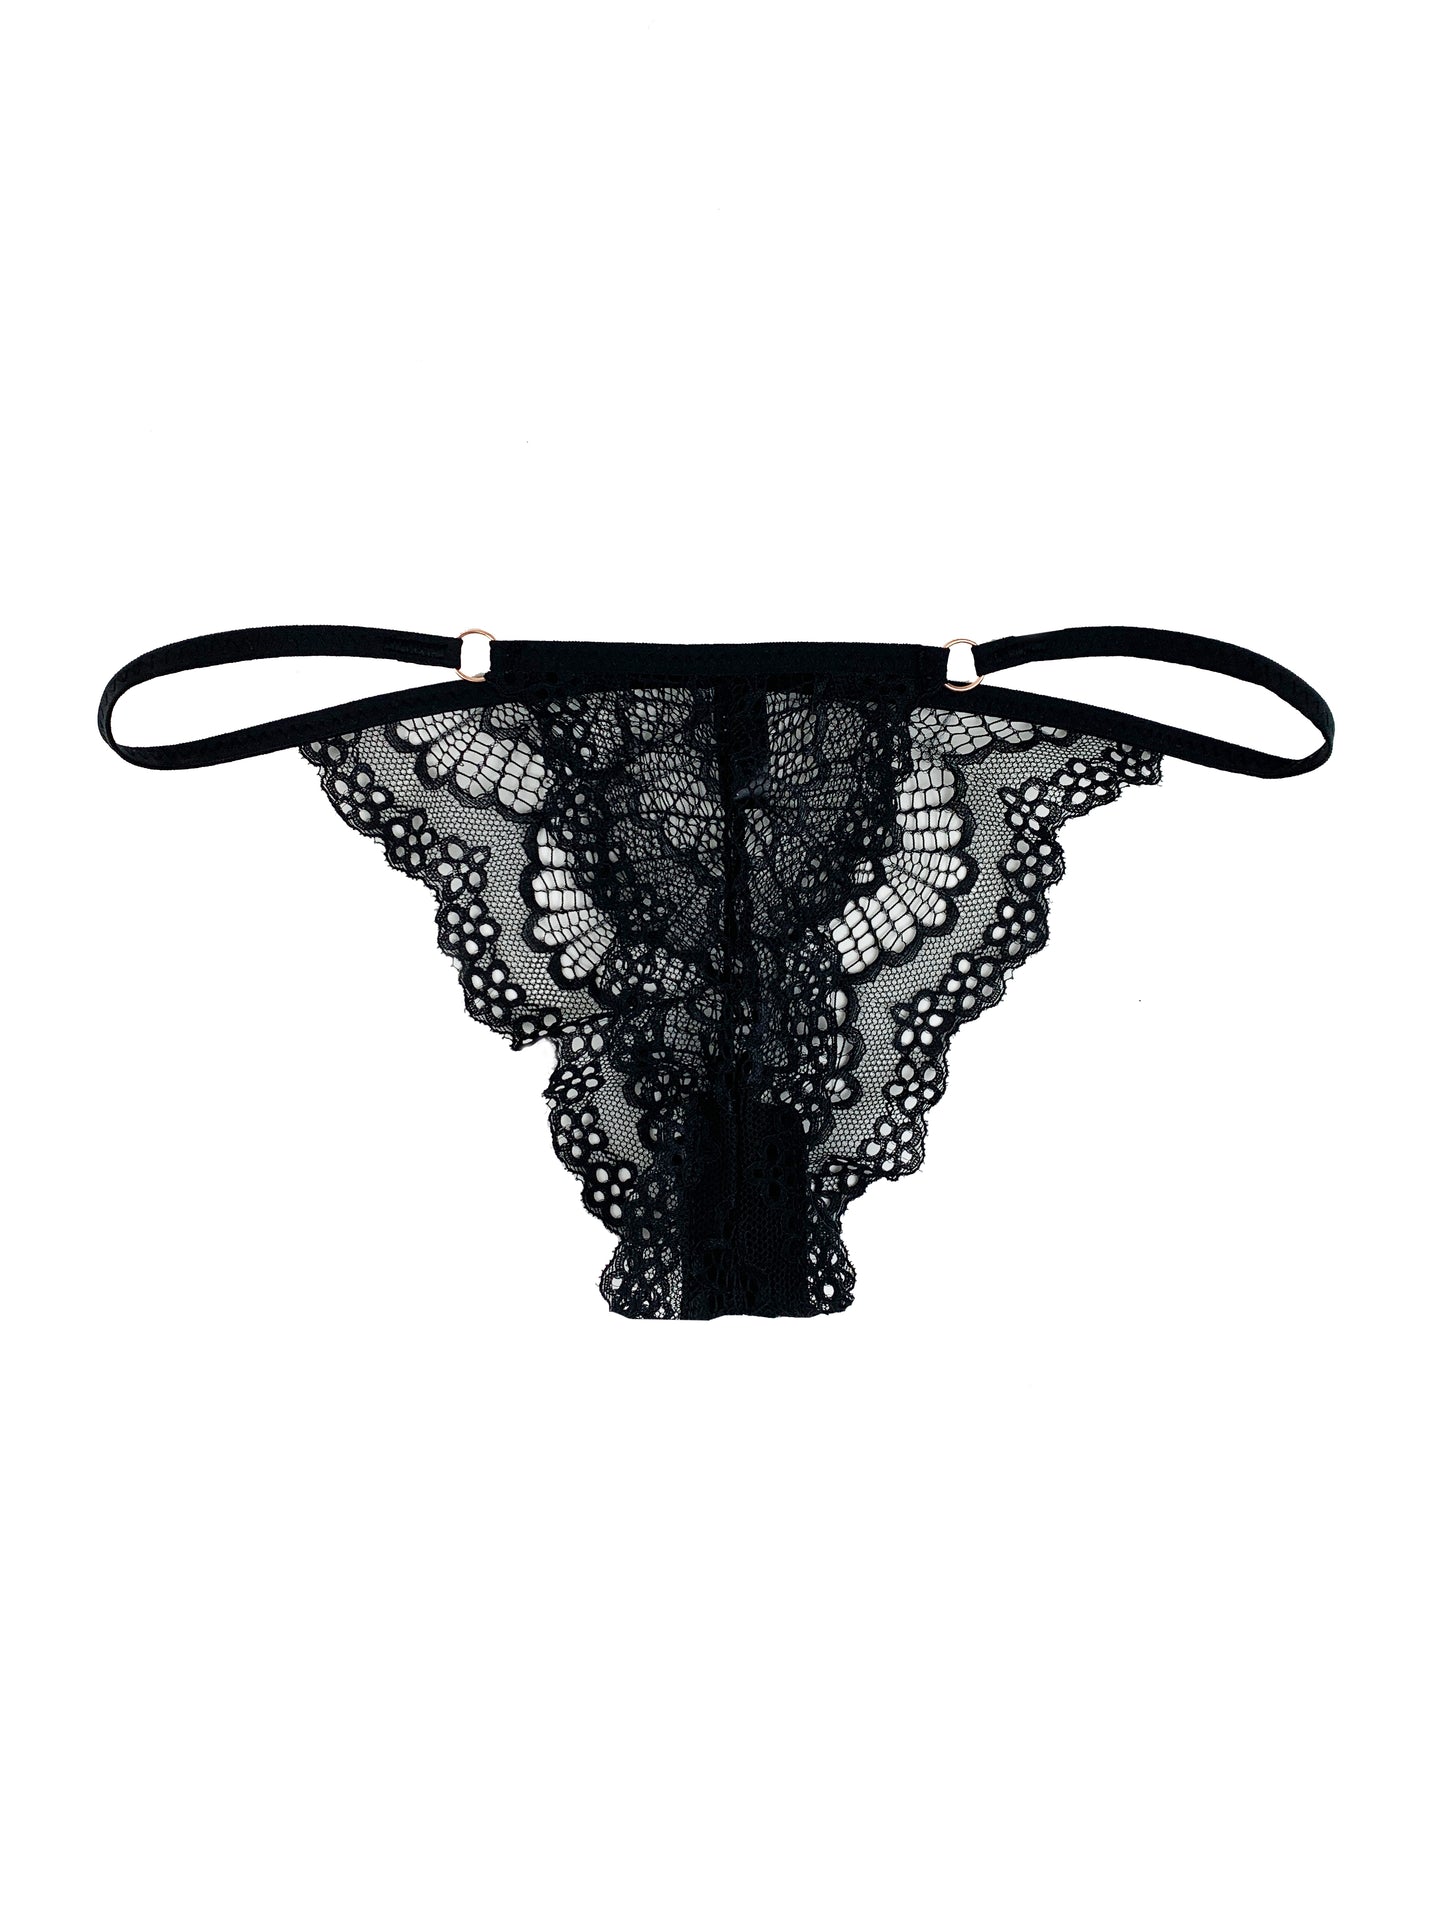 Delicate black lace string thong